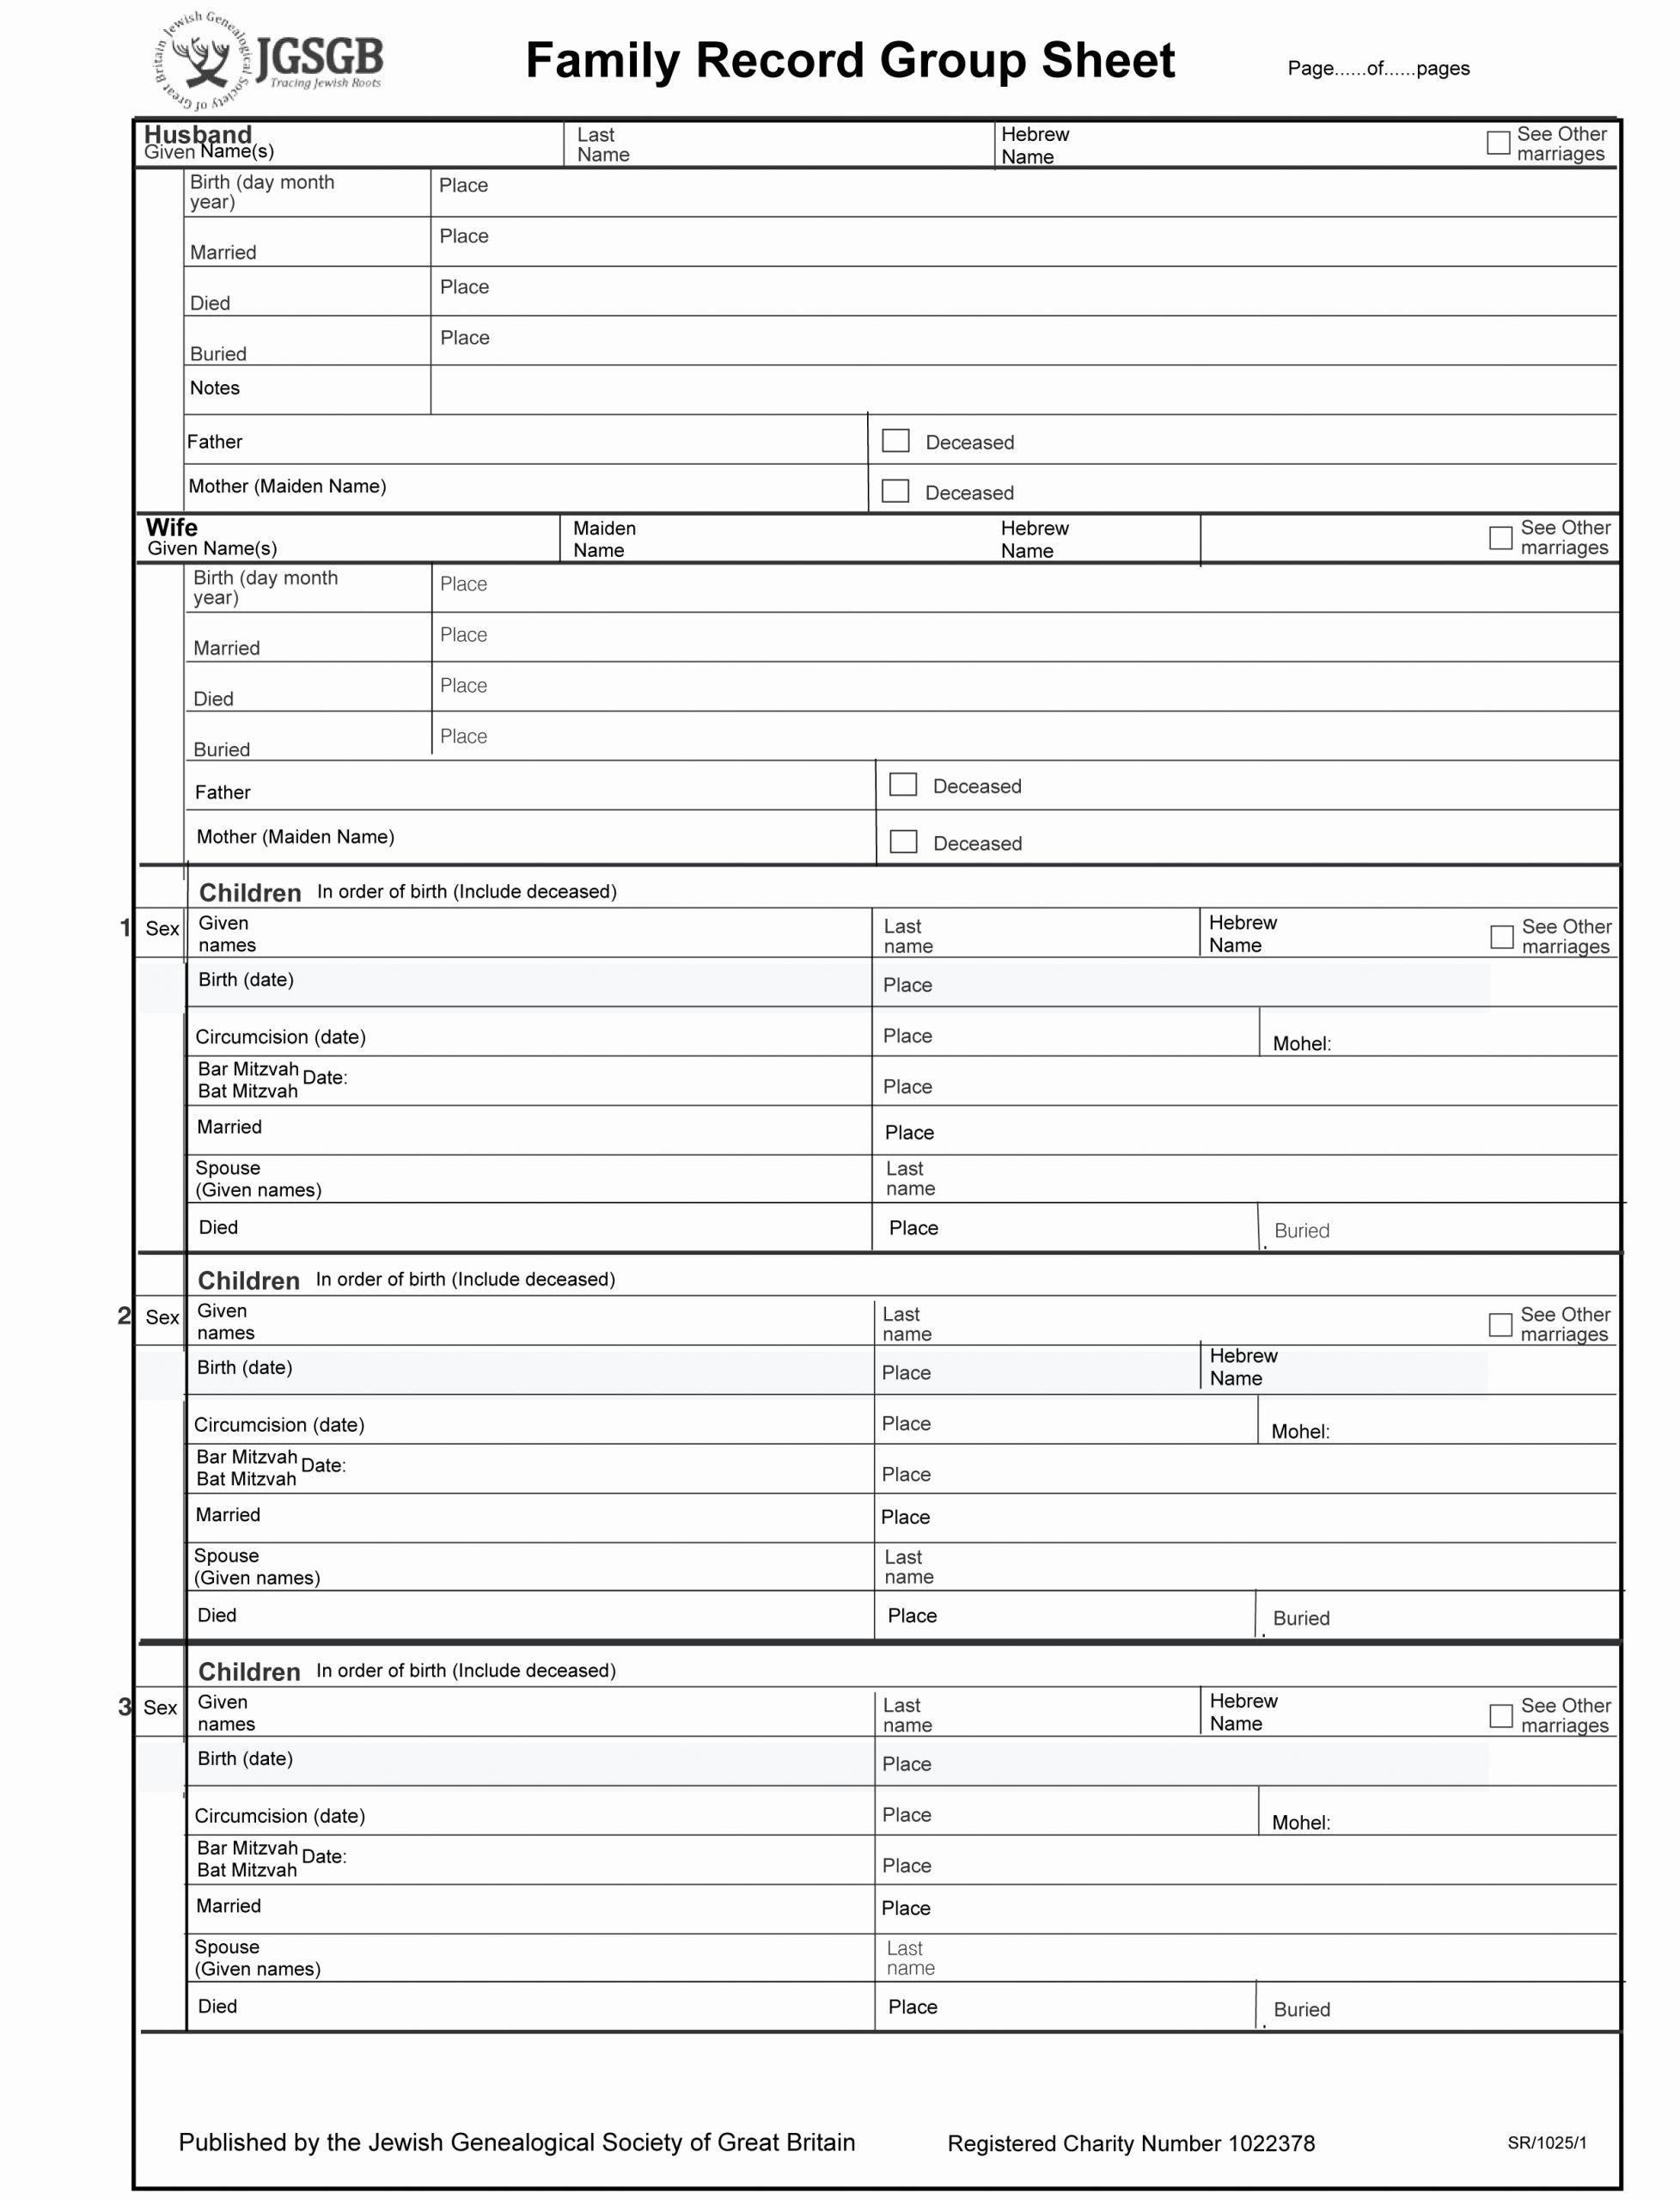 Family Group Sheet Template Unique Jewish Family Group Sheet